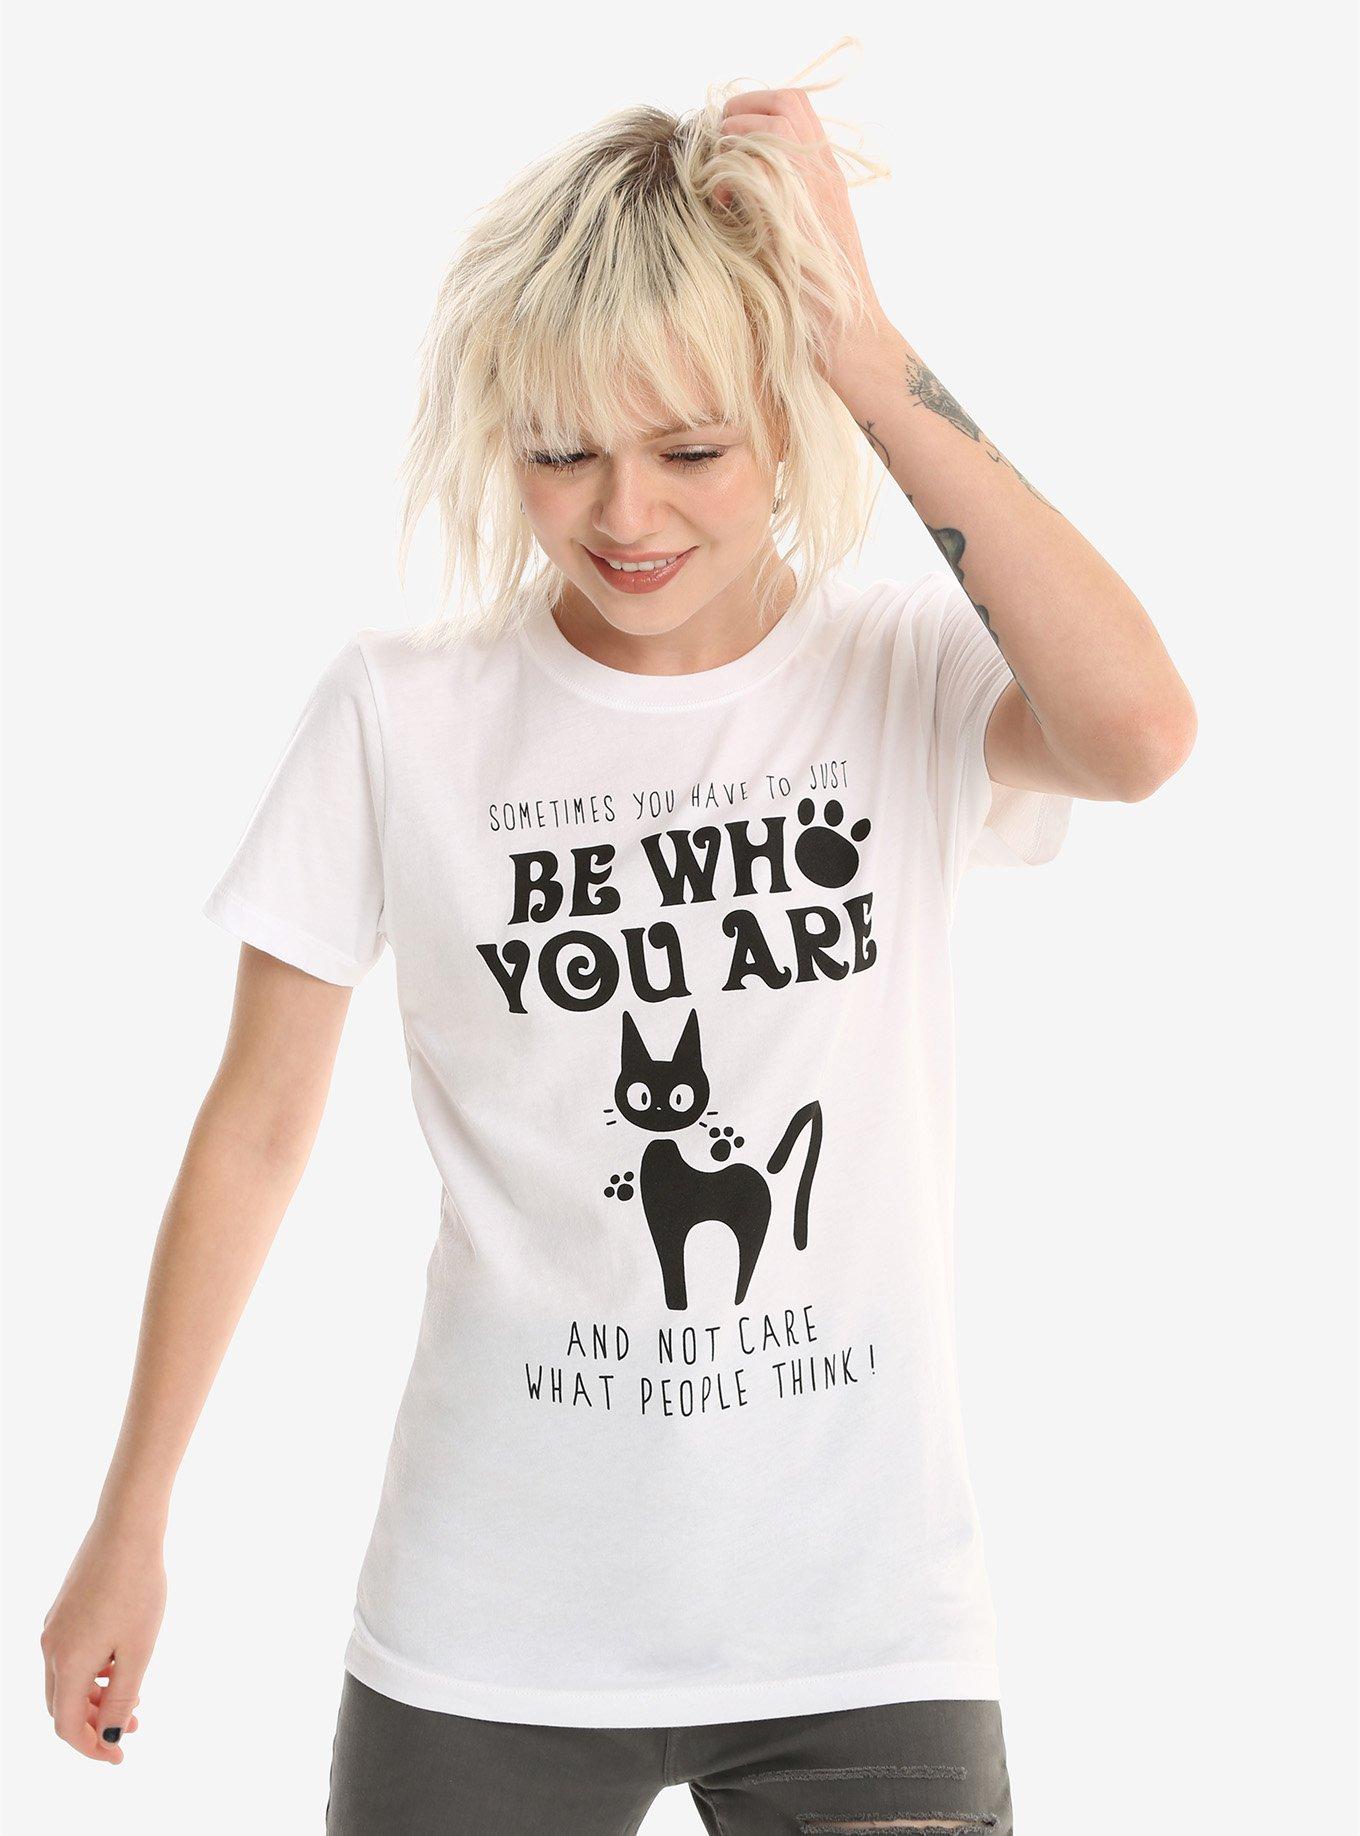 Her Universe Studio Ghibli Kiki's Delivery Service Jiji Be Who You Are Girls T-Shirt, WHITE, hi-res